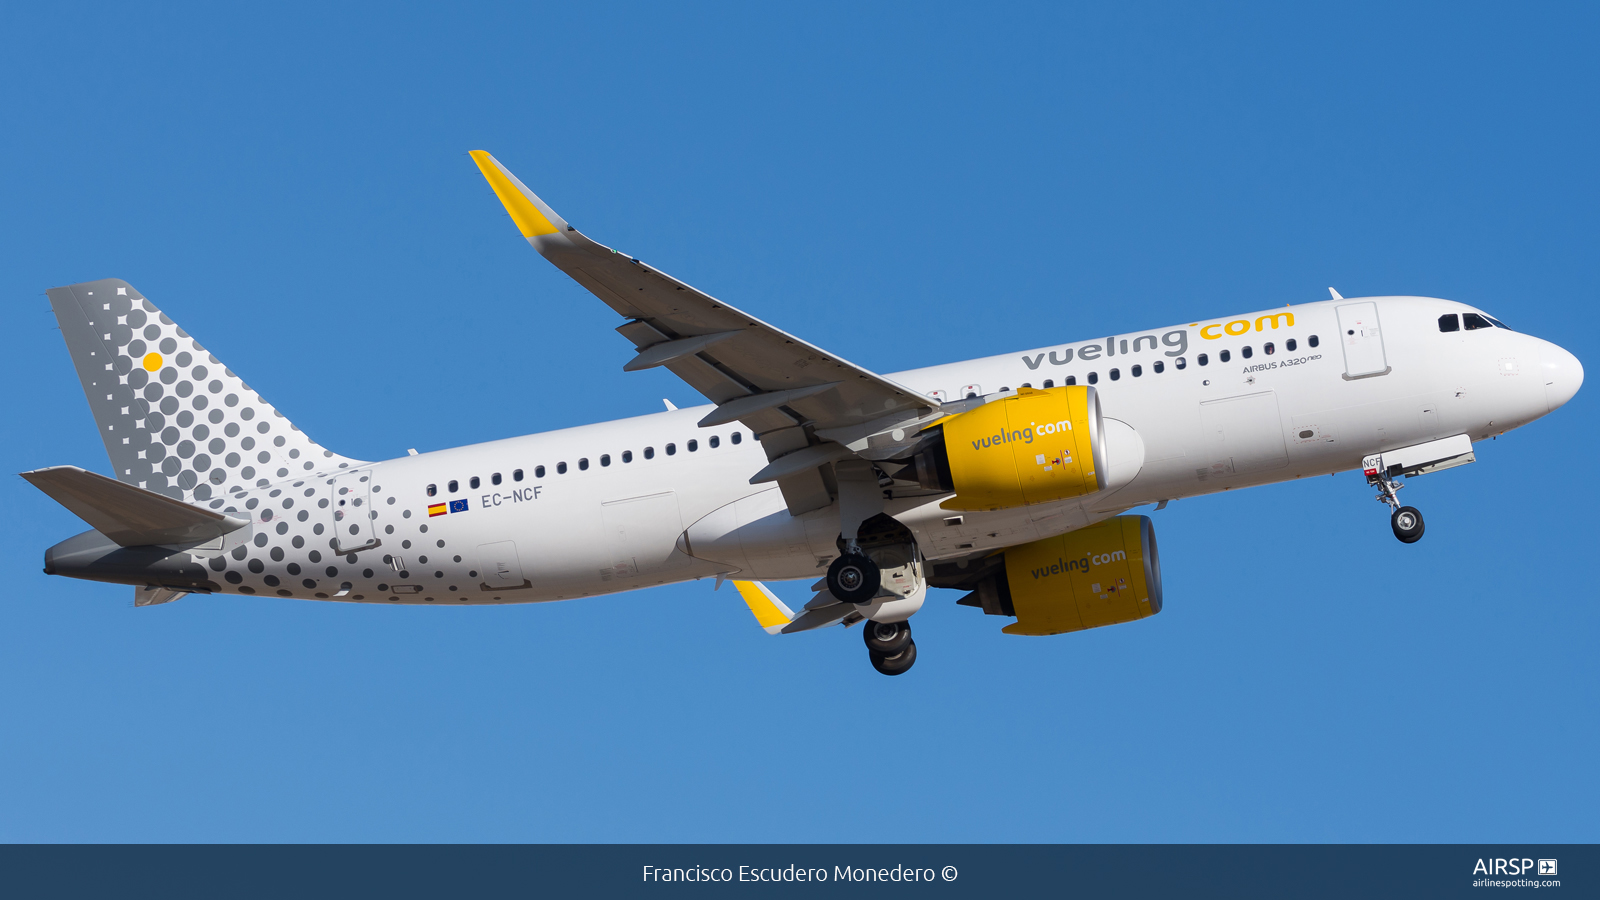 Vueling  Airbus A320neo  EC-NCF